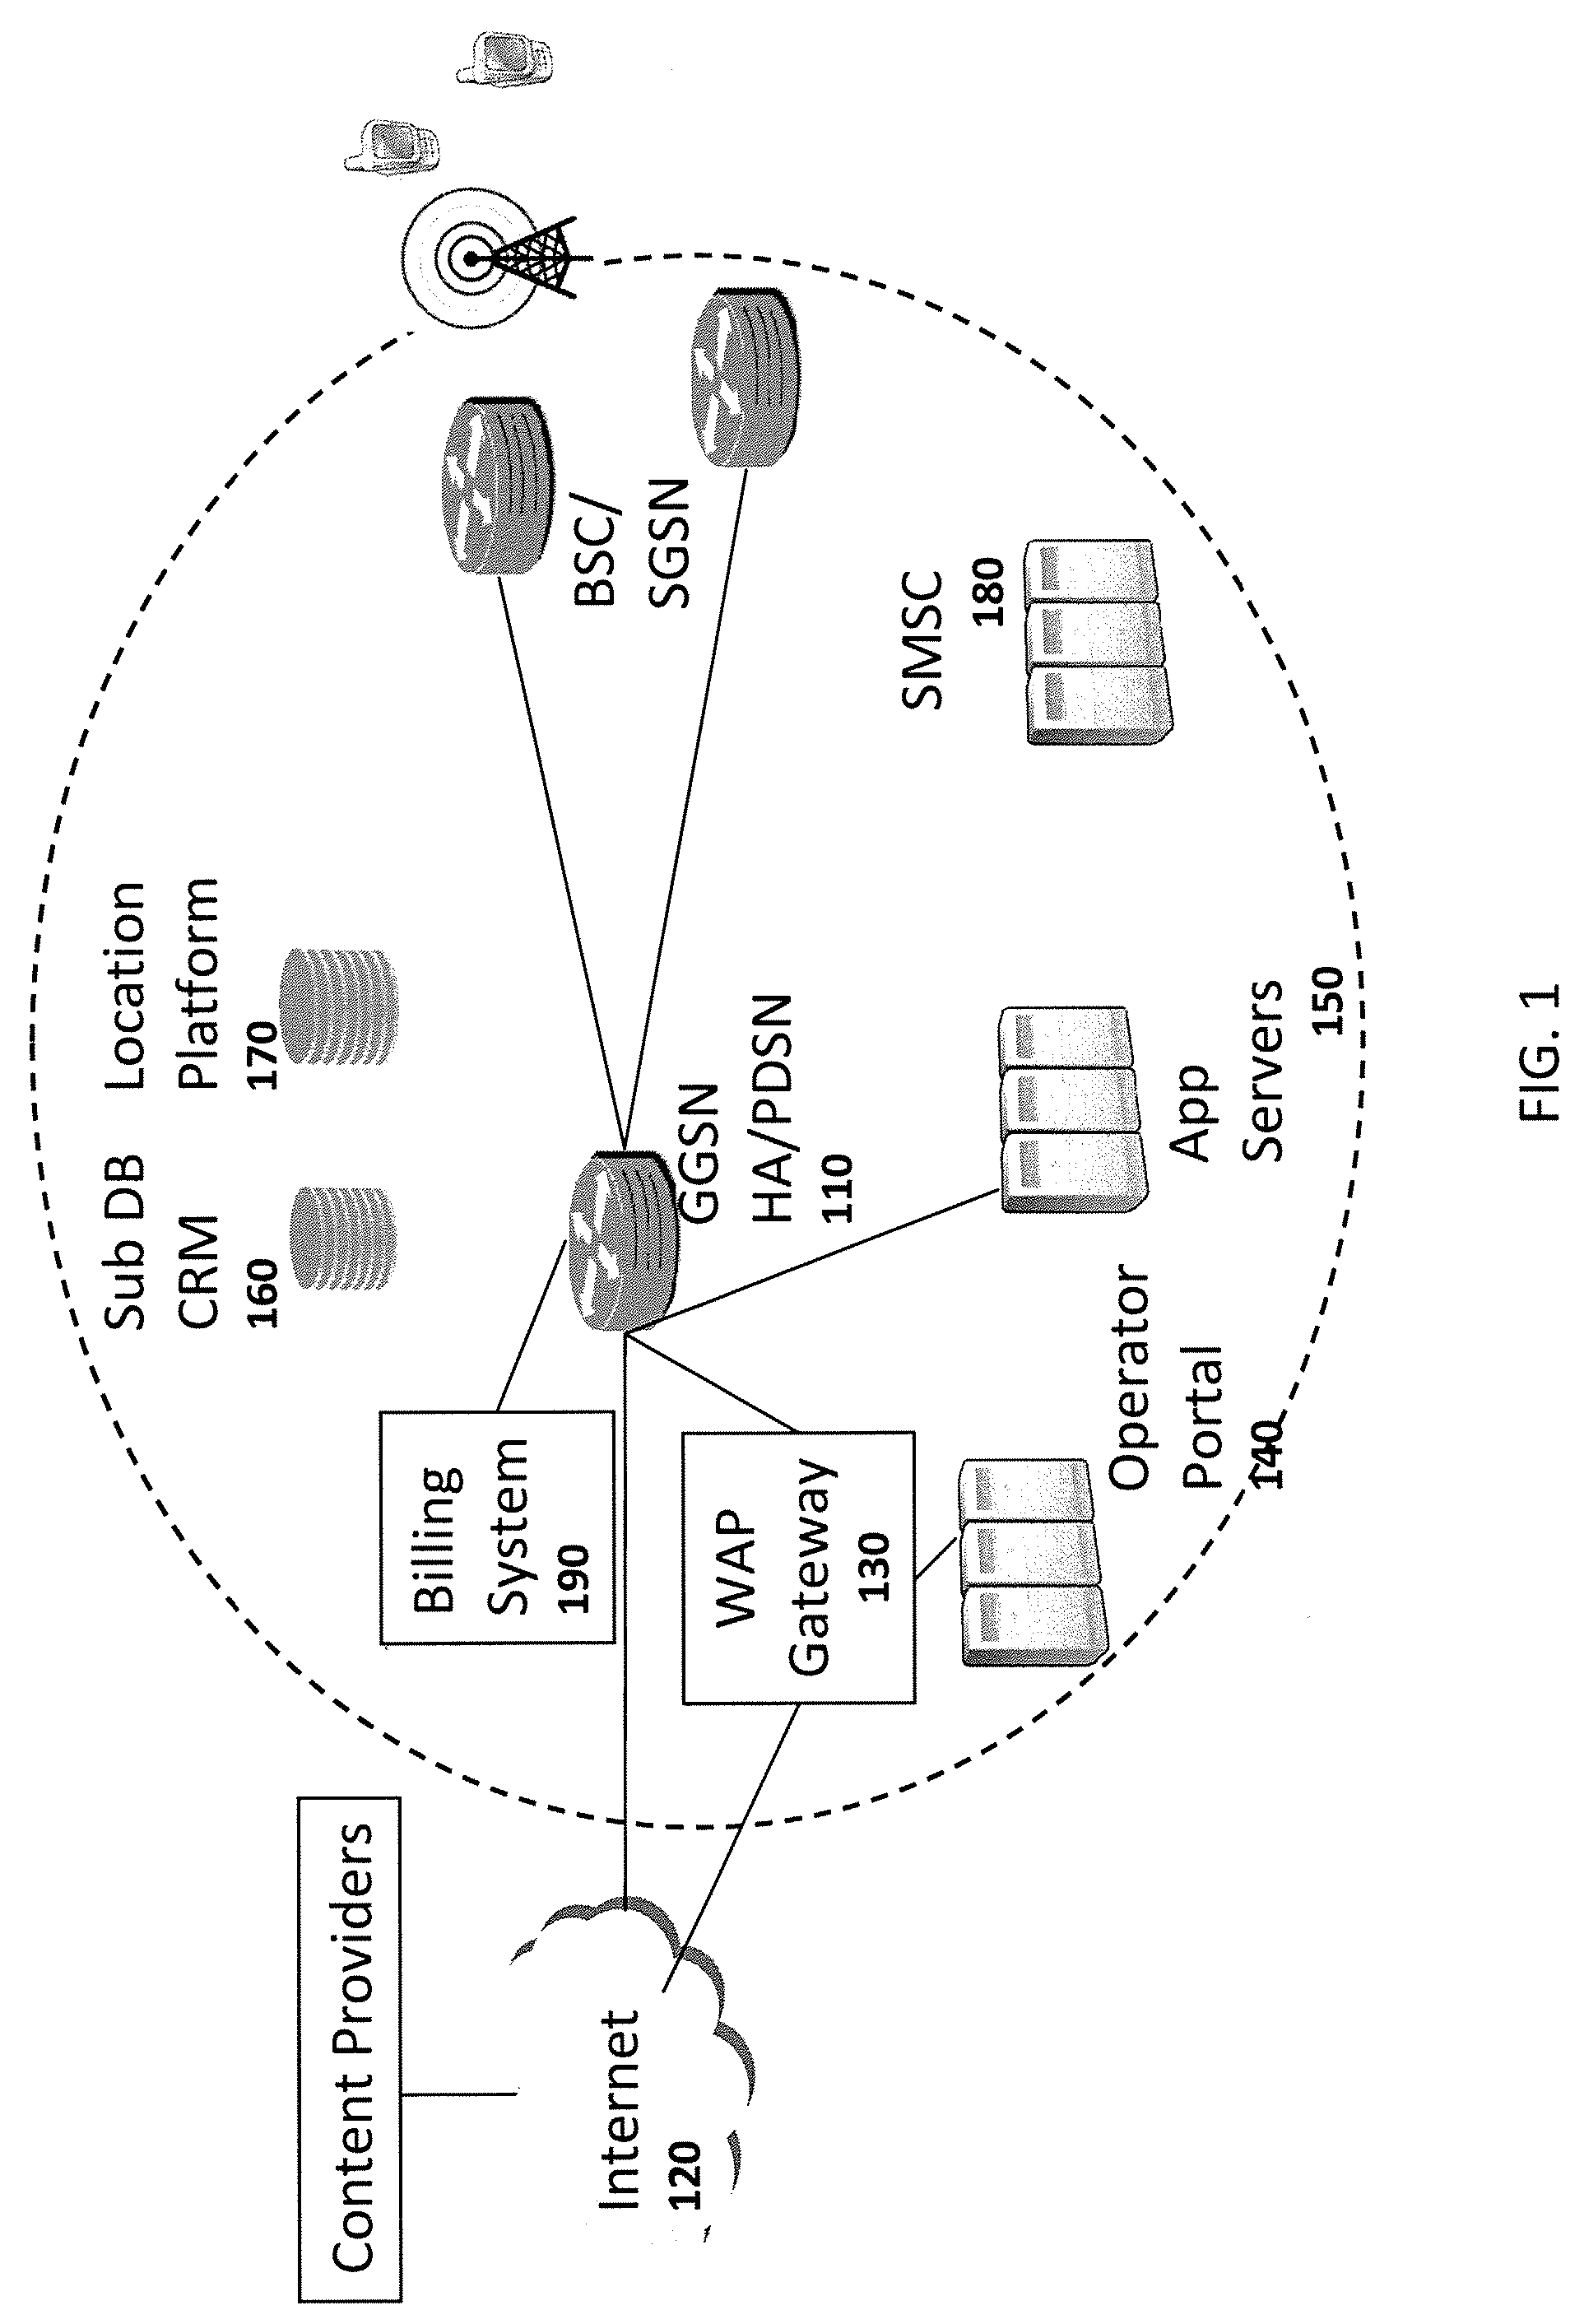 Method and apparatus for real-time collection of information about application level activity and other user information on a mobile data network